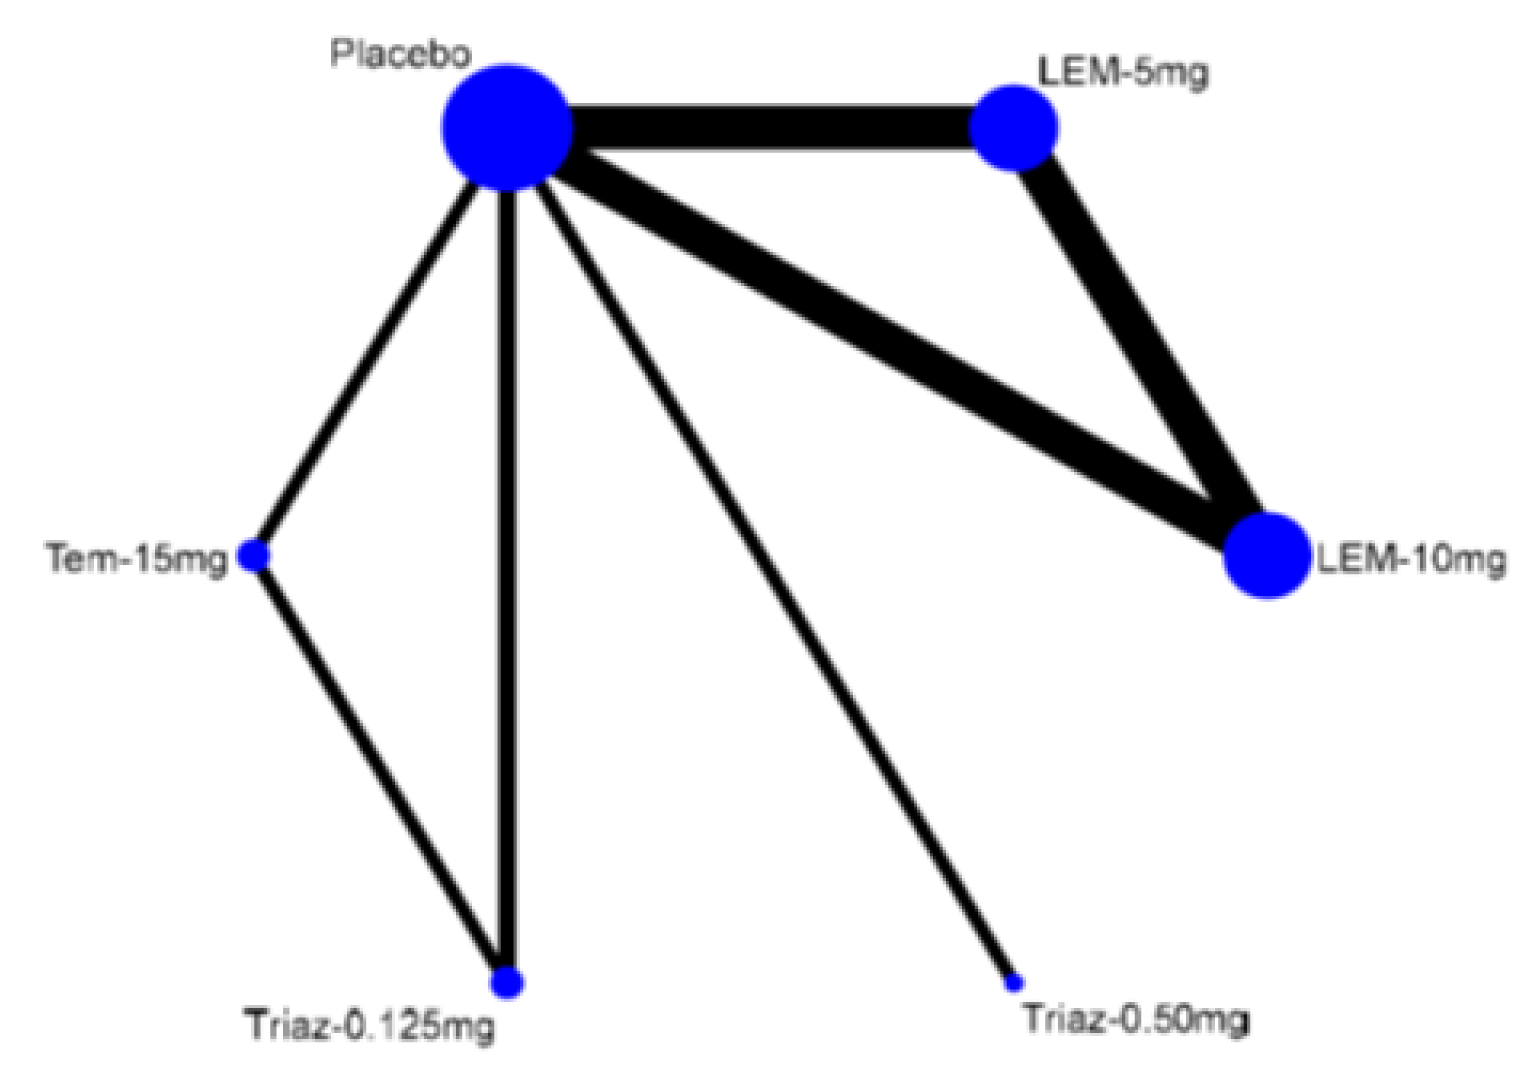 Network of the different comparisons for insomnia (with the outcome of latency to persistent sleep) where bigger nodes imply more information (patients). Placebo is connected to lemborexant, temazepam, and triazolam.